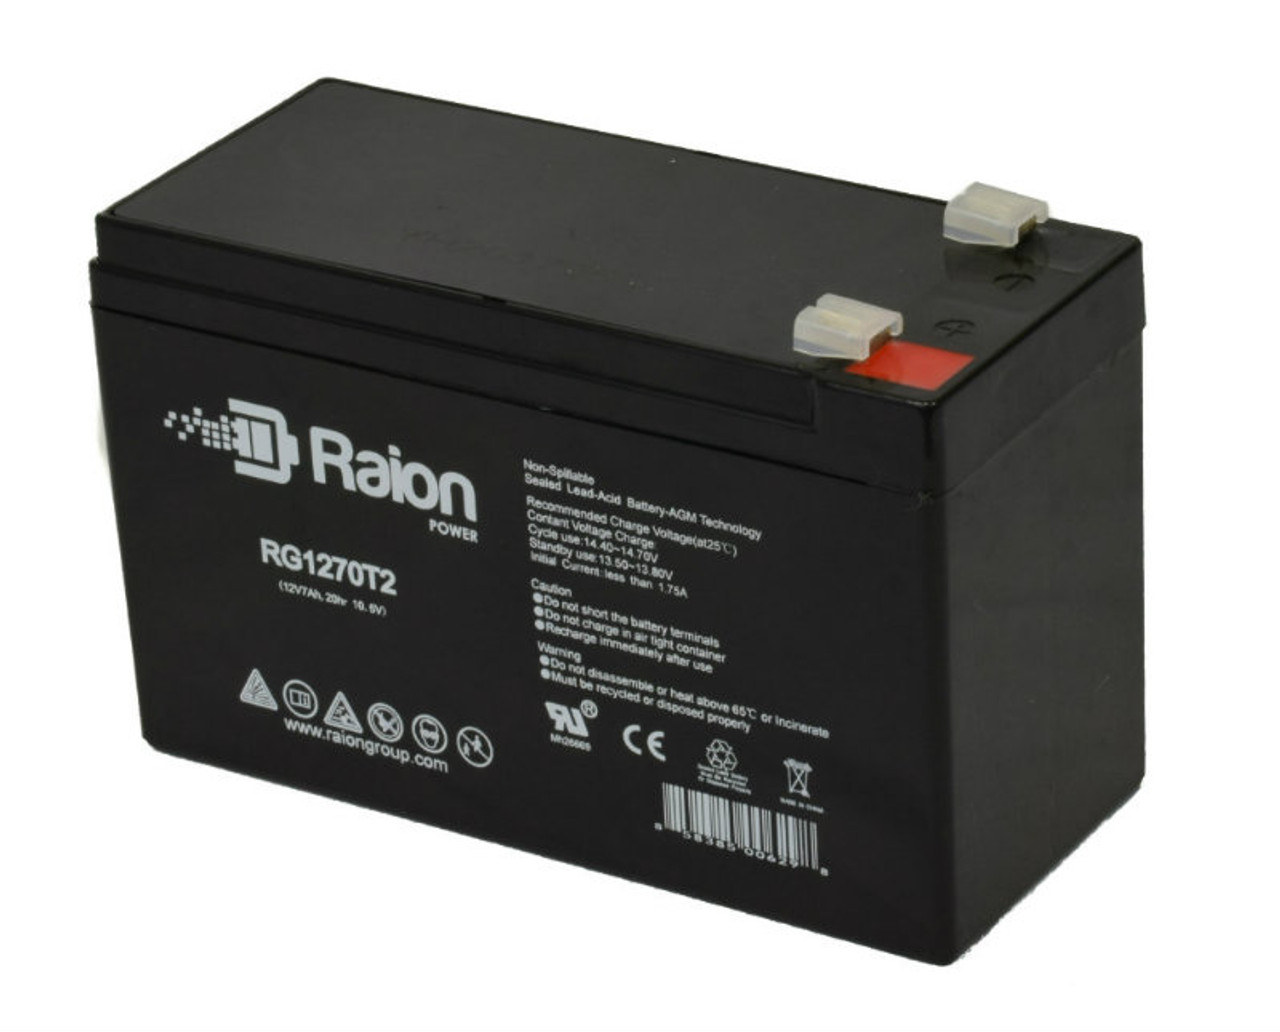 Raion Power RG1270T1 12V 7Ah Non-Spillable Replacement Battery for Bio-Medicus 550 Console